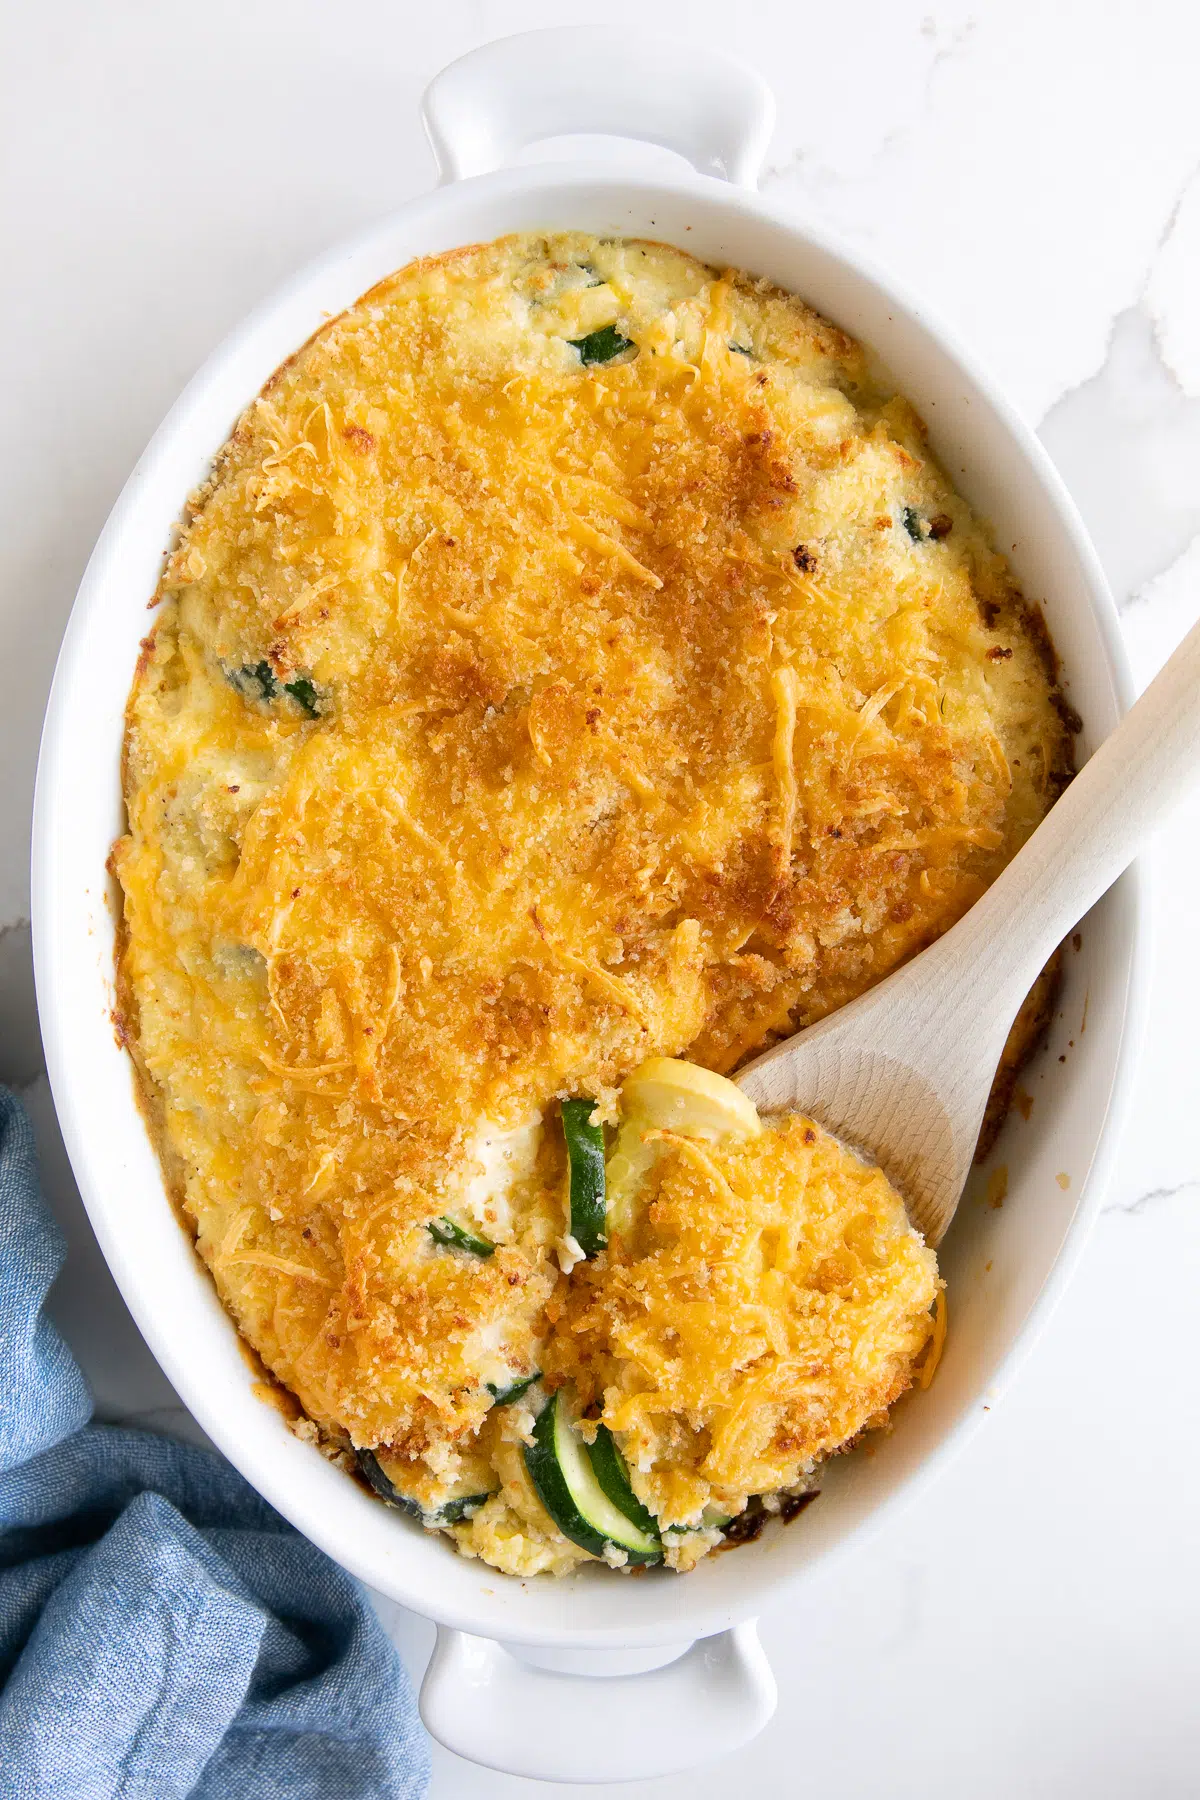 White baking dish filled with baked zucchini casserole topped with panko breadcrumbs and shredded melted cheese.